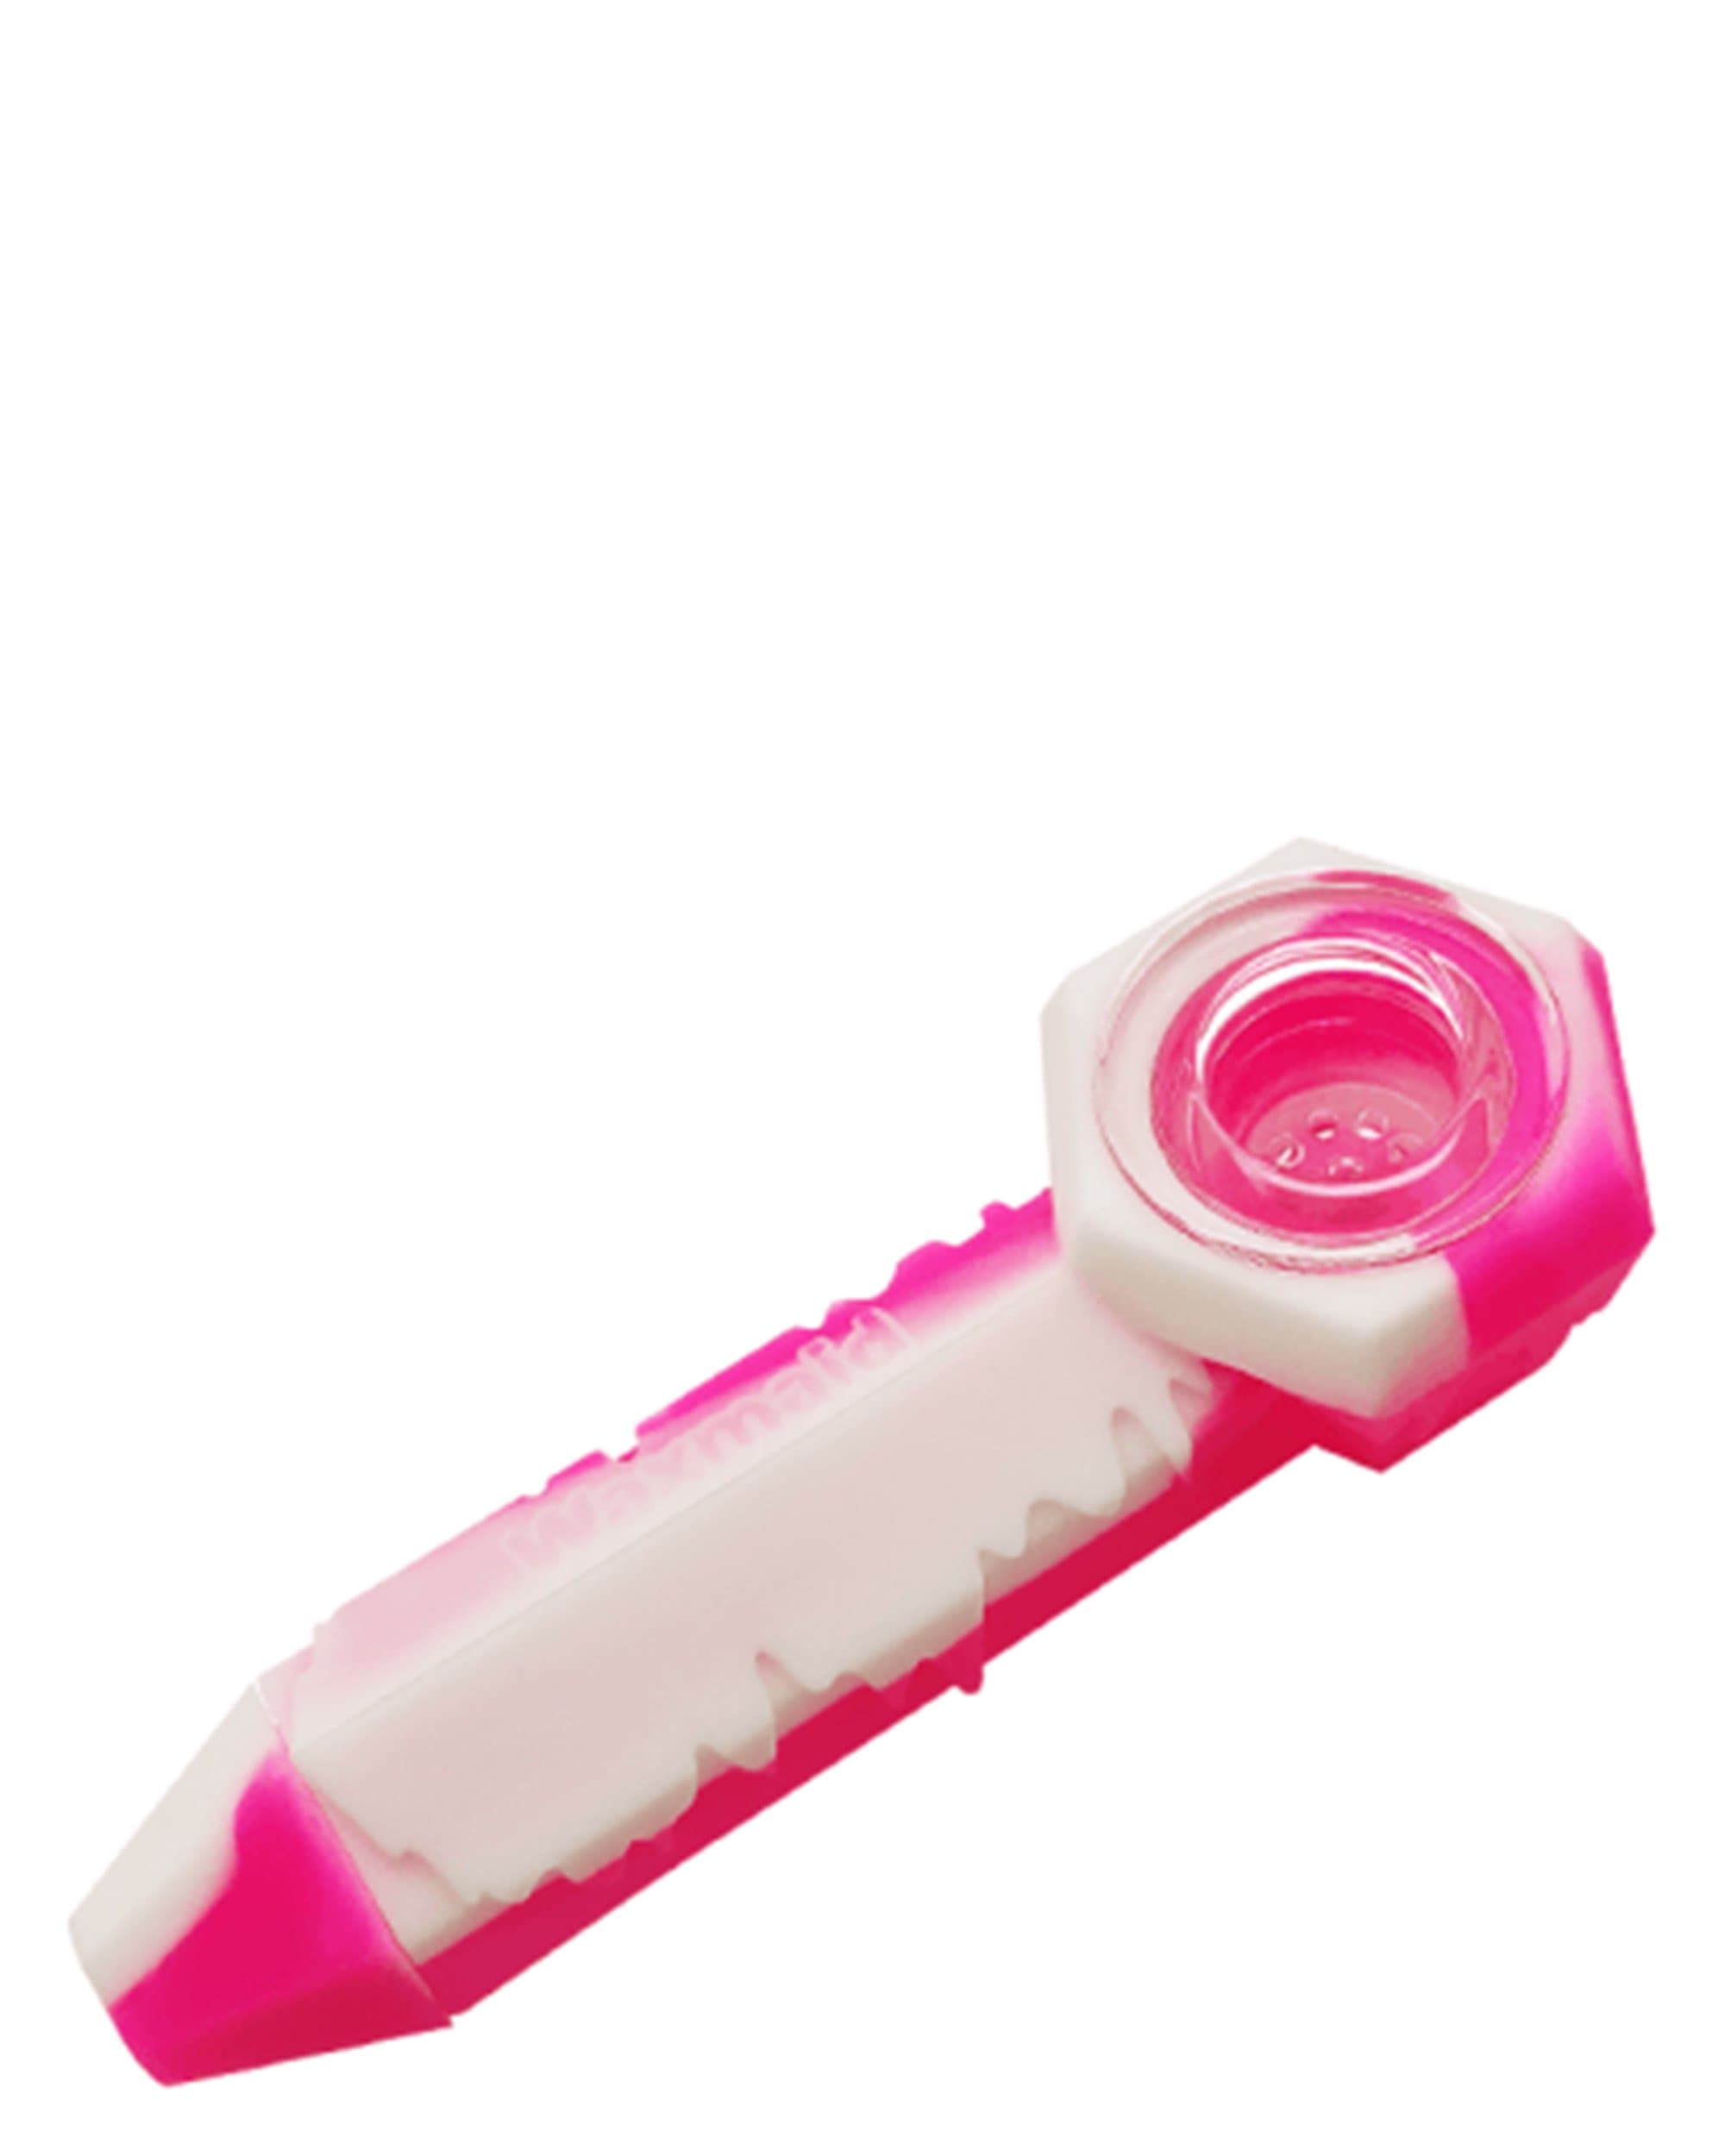 waxmaid freezable silicone ice spoon pipe pink cream hand pipe 723685128042 28414170595402